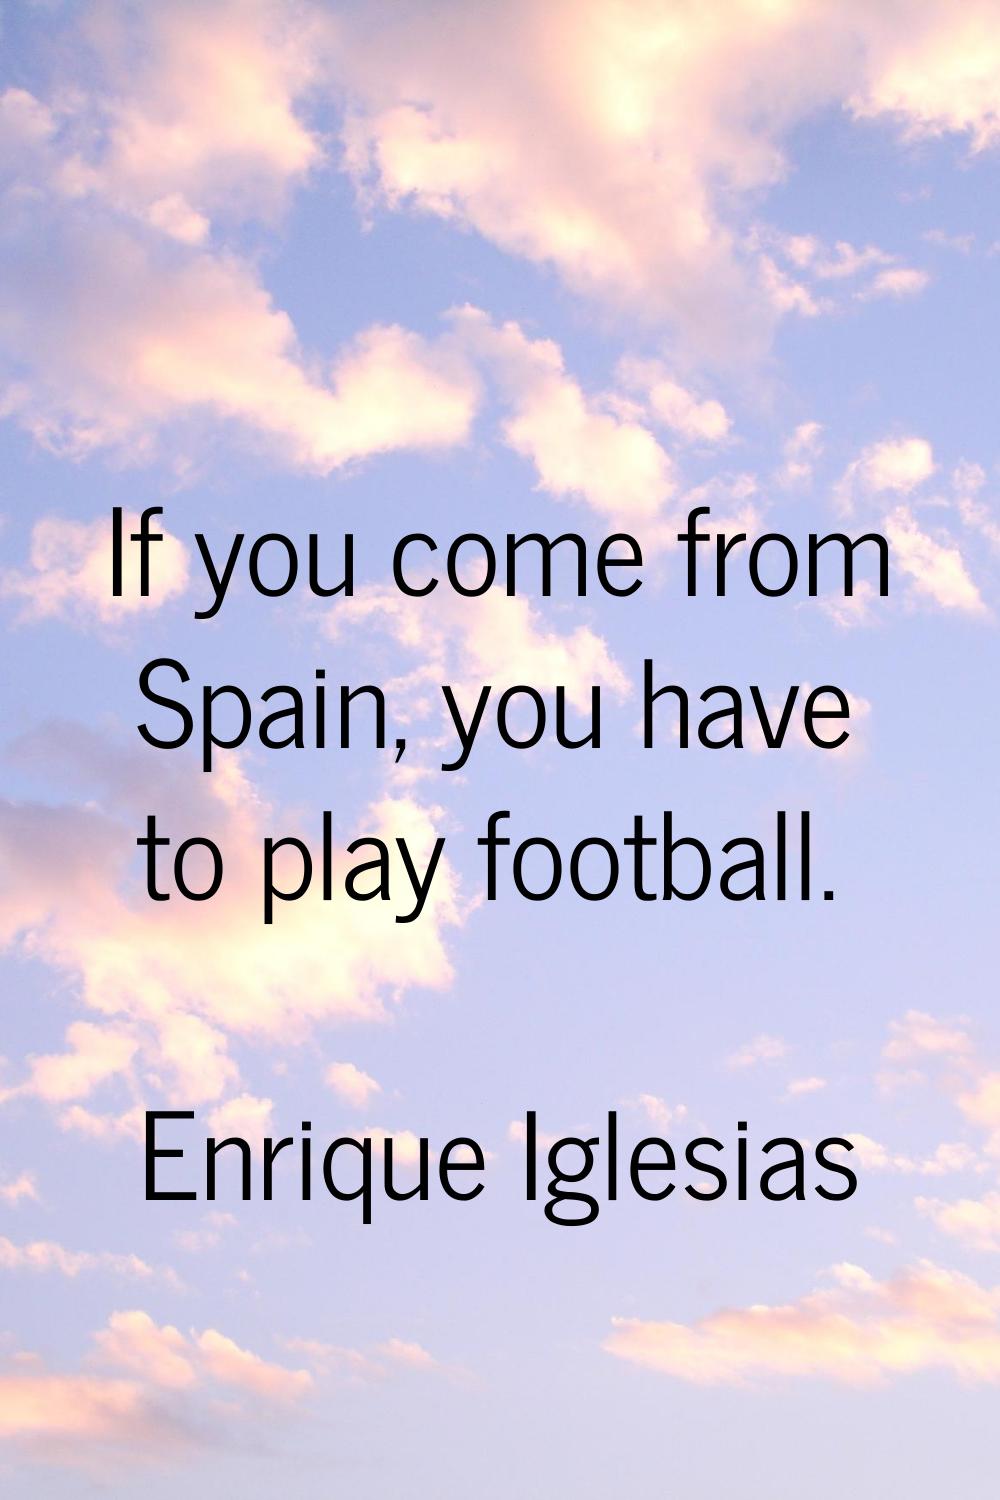 If you come from Spain, you have to play football.